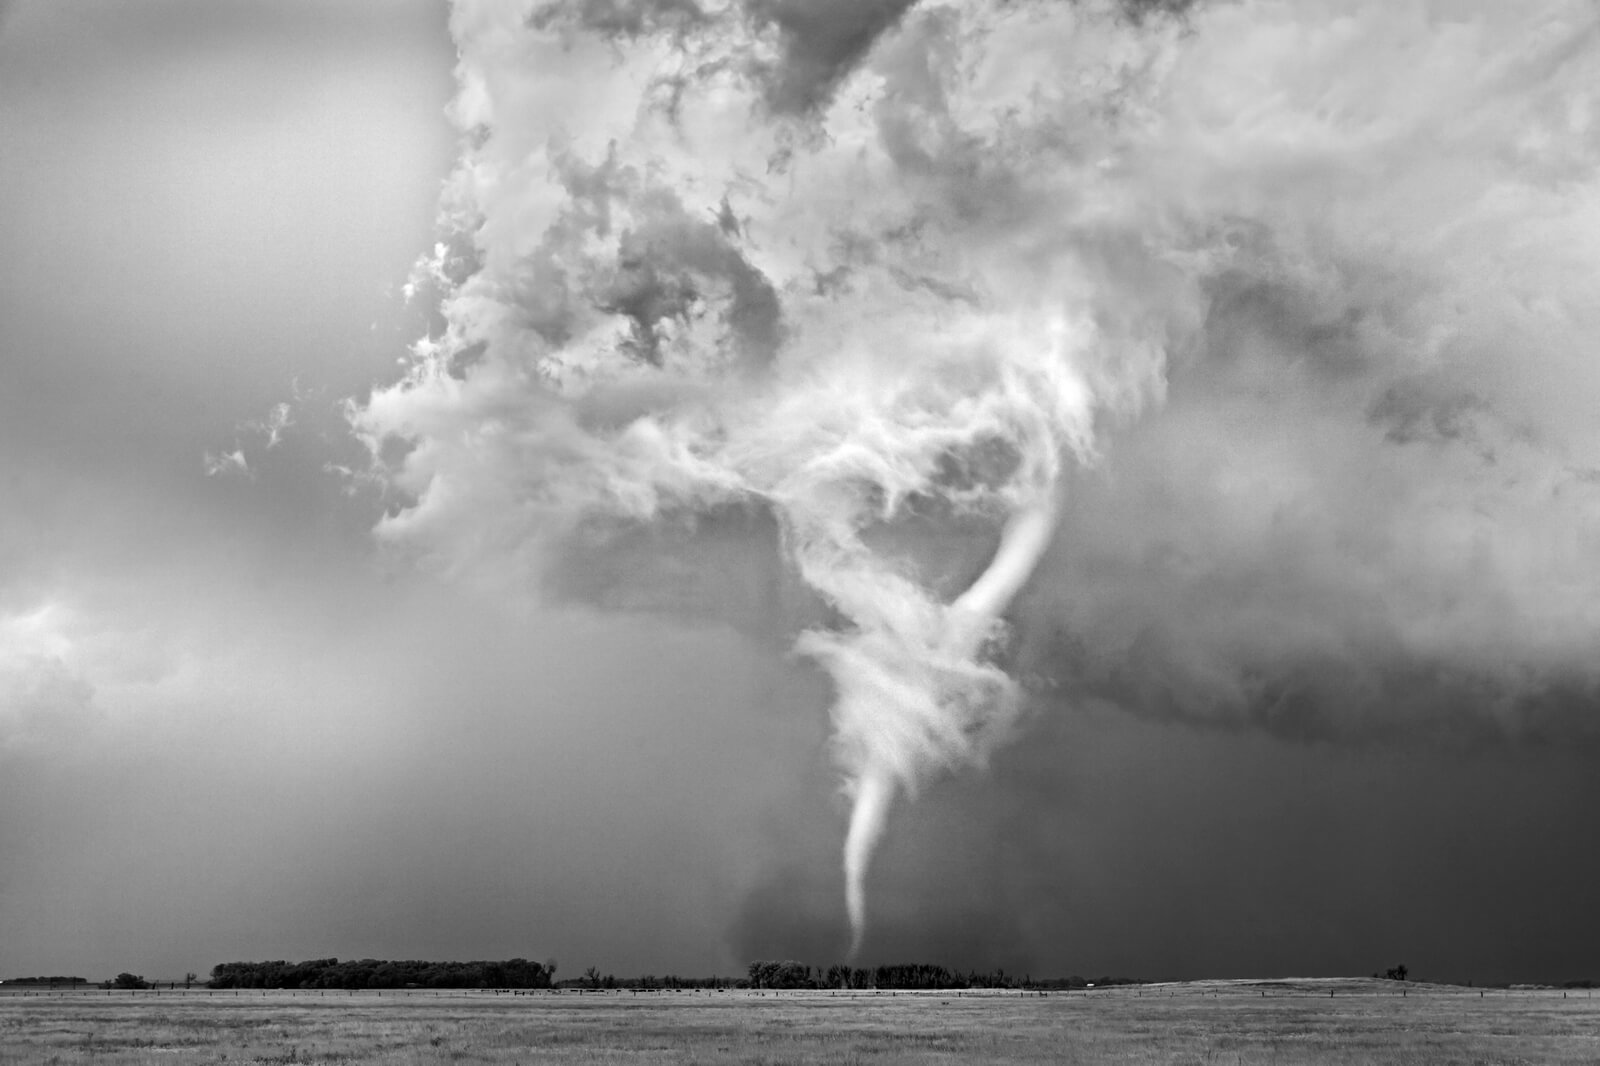 Supercells by Mitch Dobrowner